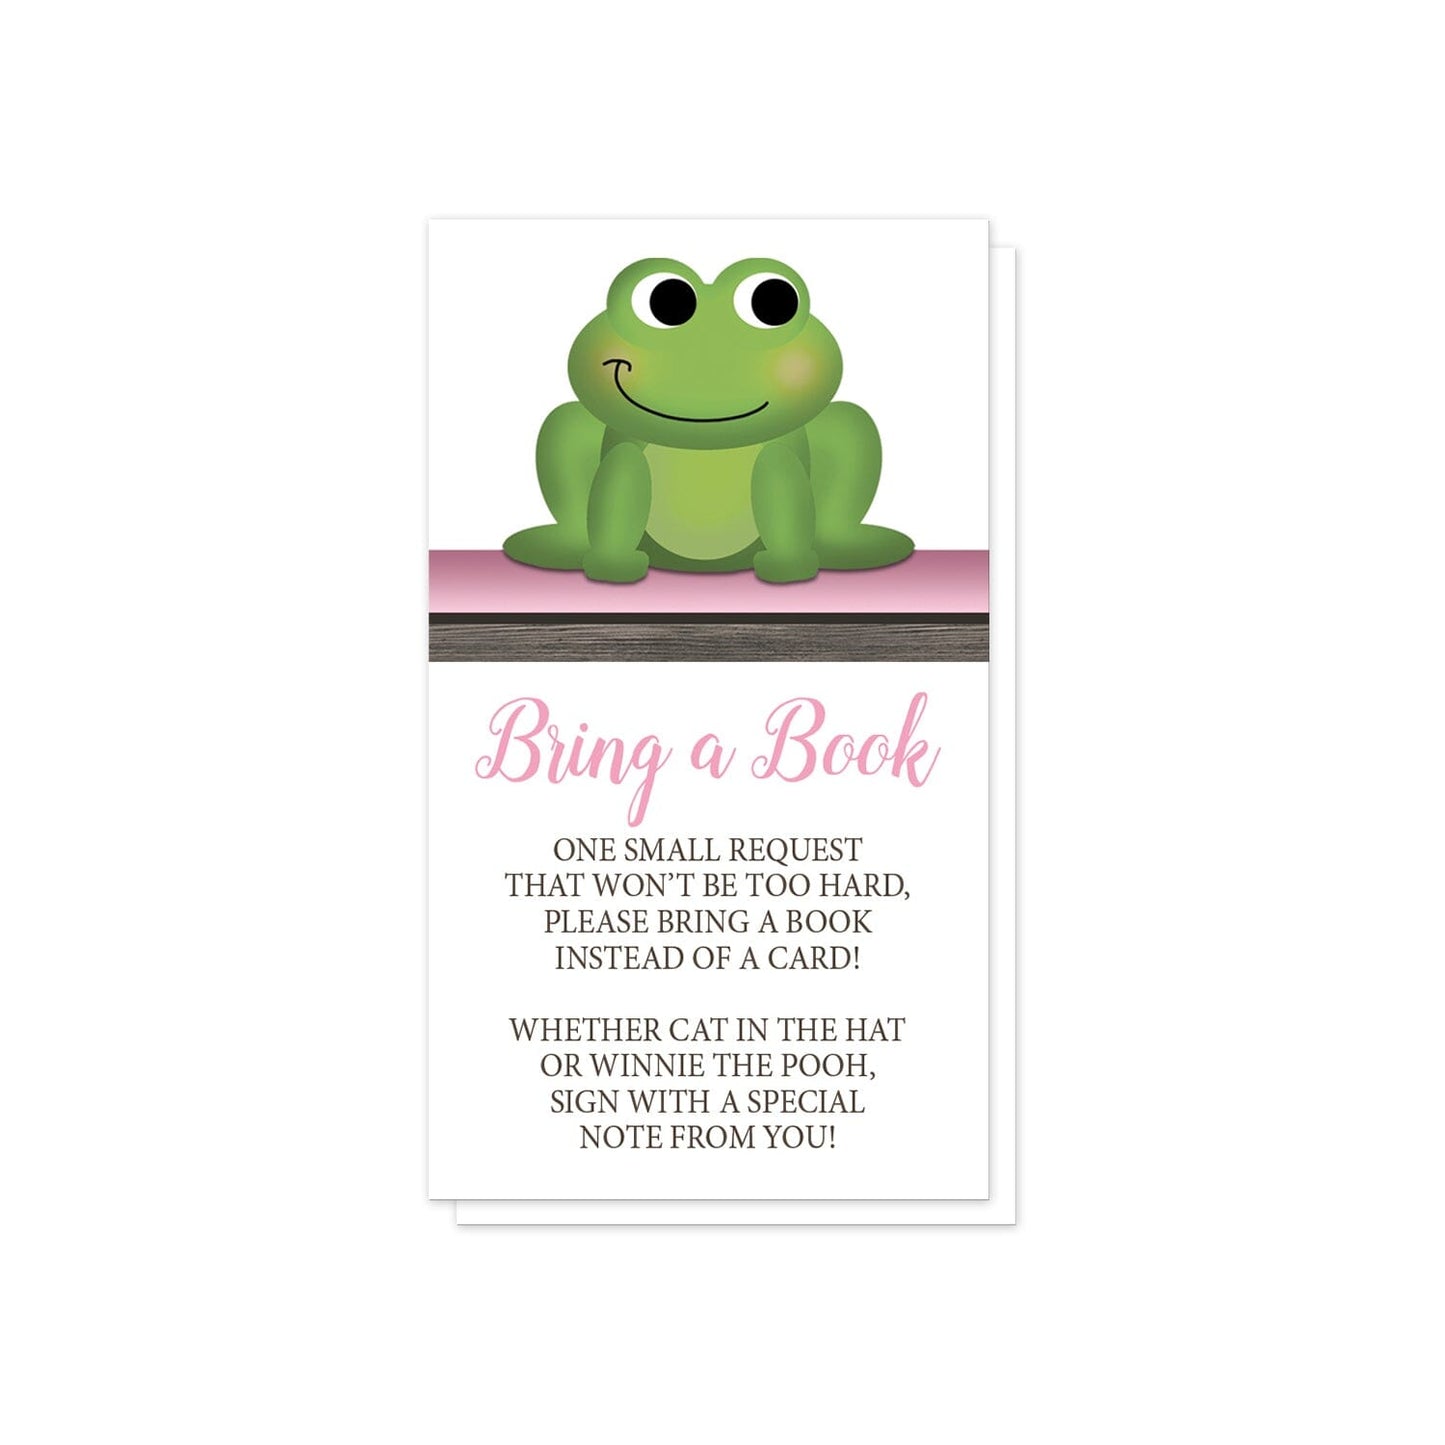 Cute Frog Green Pink Rustic Brown Bring a Book Cards at Artistically Invited. Cute frog green pink rustic brown bring a book cards with a happy and adorable green frog sitting on a pink and brown wood stripe at the top of the cards. Your book request details are printed in pink and brown on white below the cute frog. 